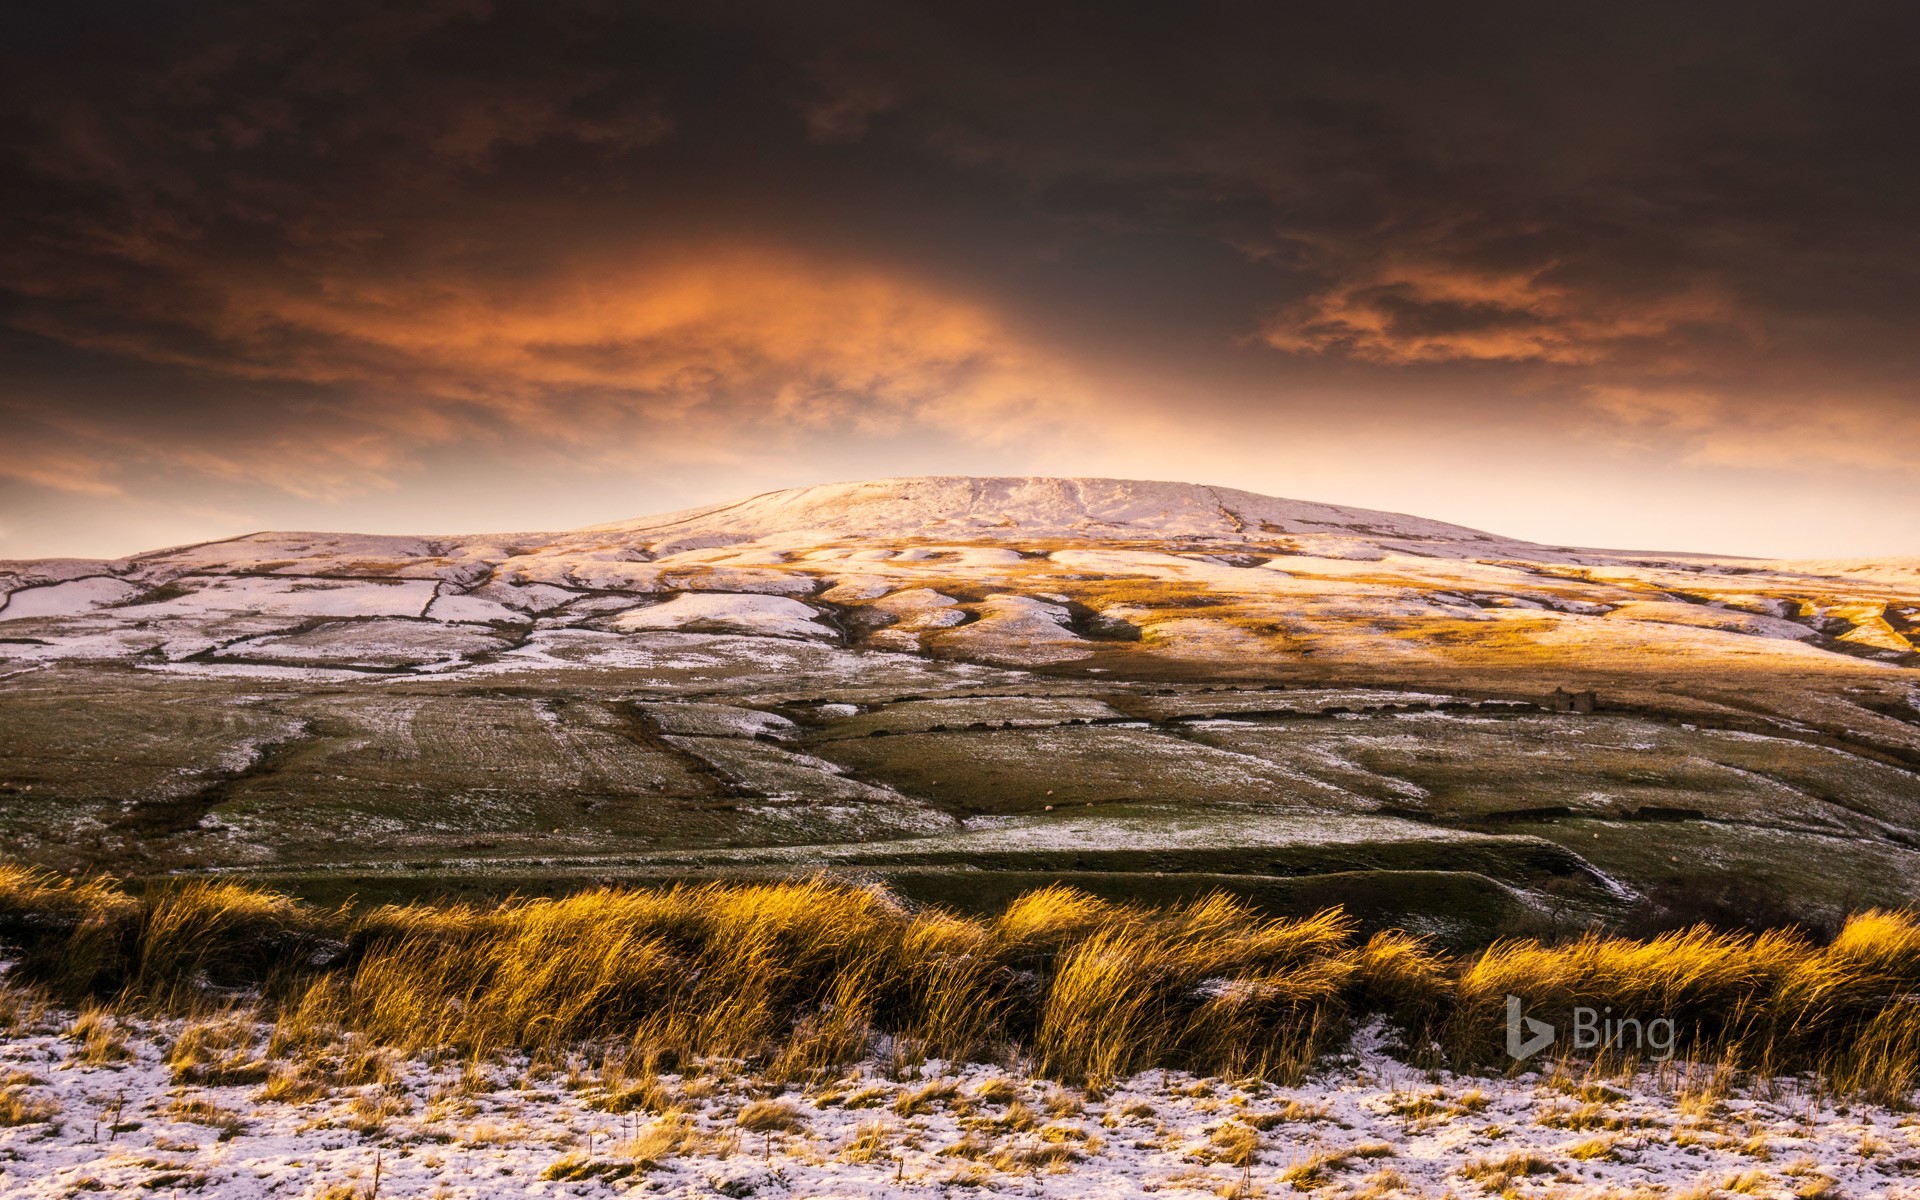 Low winter sunlight and frost in the Yorkshire Dales